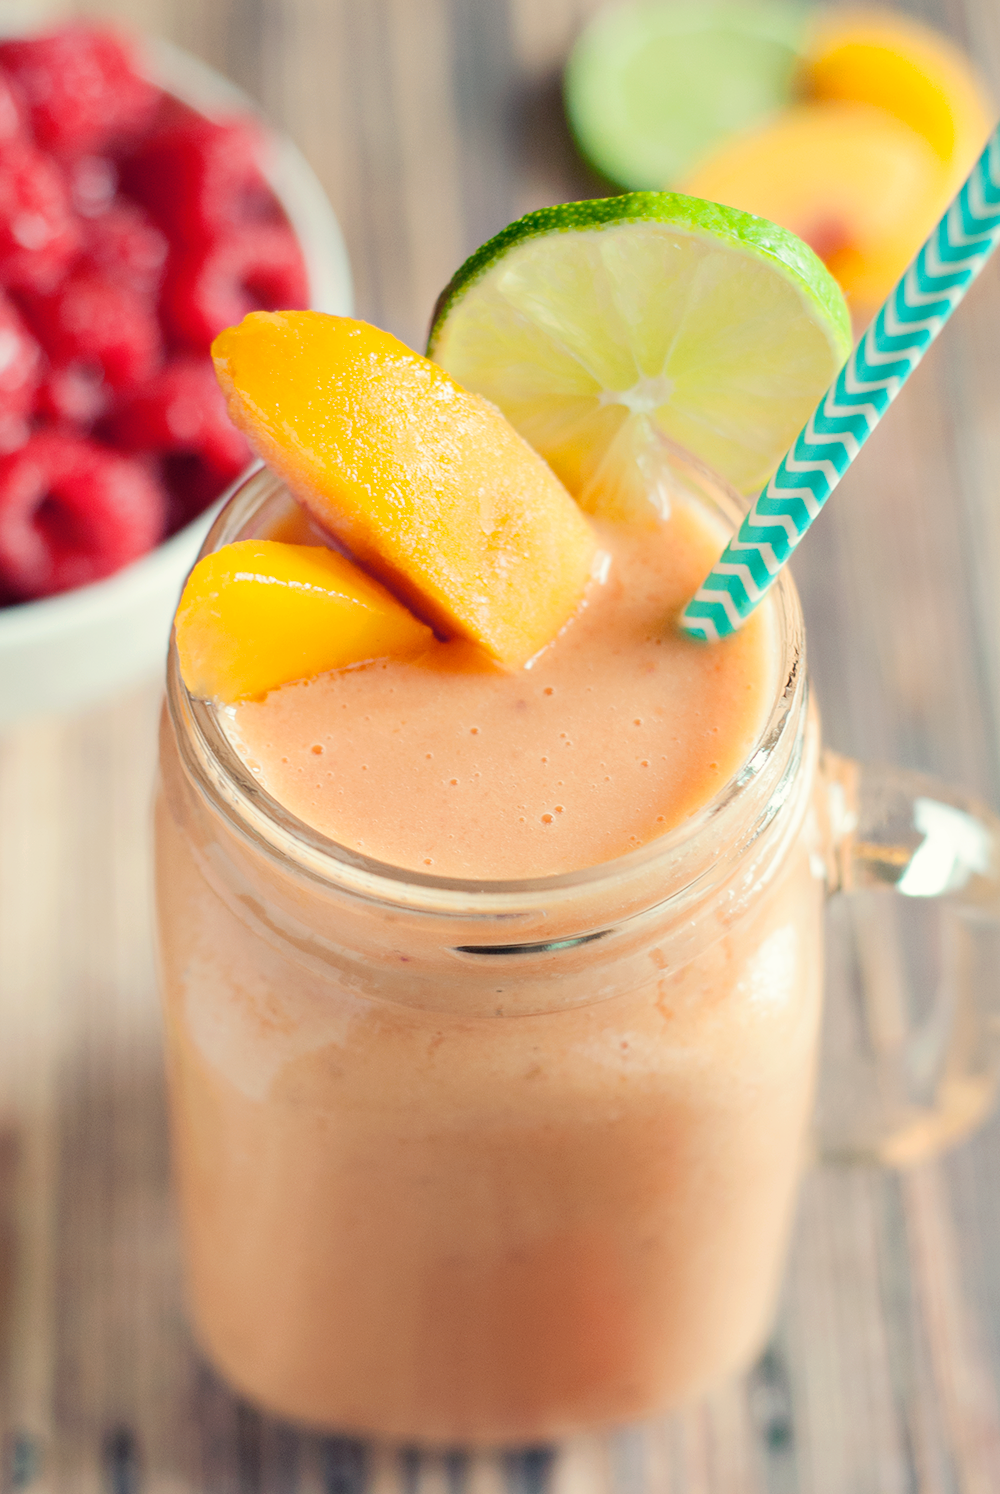 This easy peach raspberry smoothie is creamy, delicious, and makes the perfect breakfast, snack, or treat! Yum!